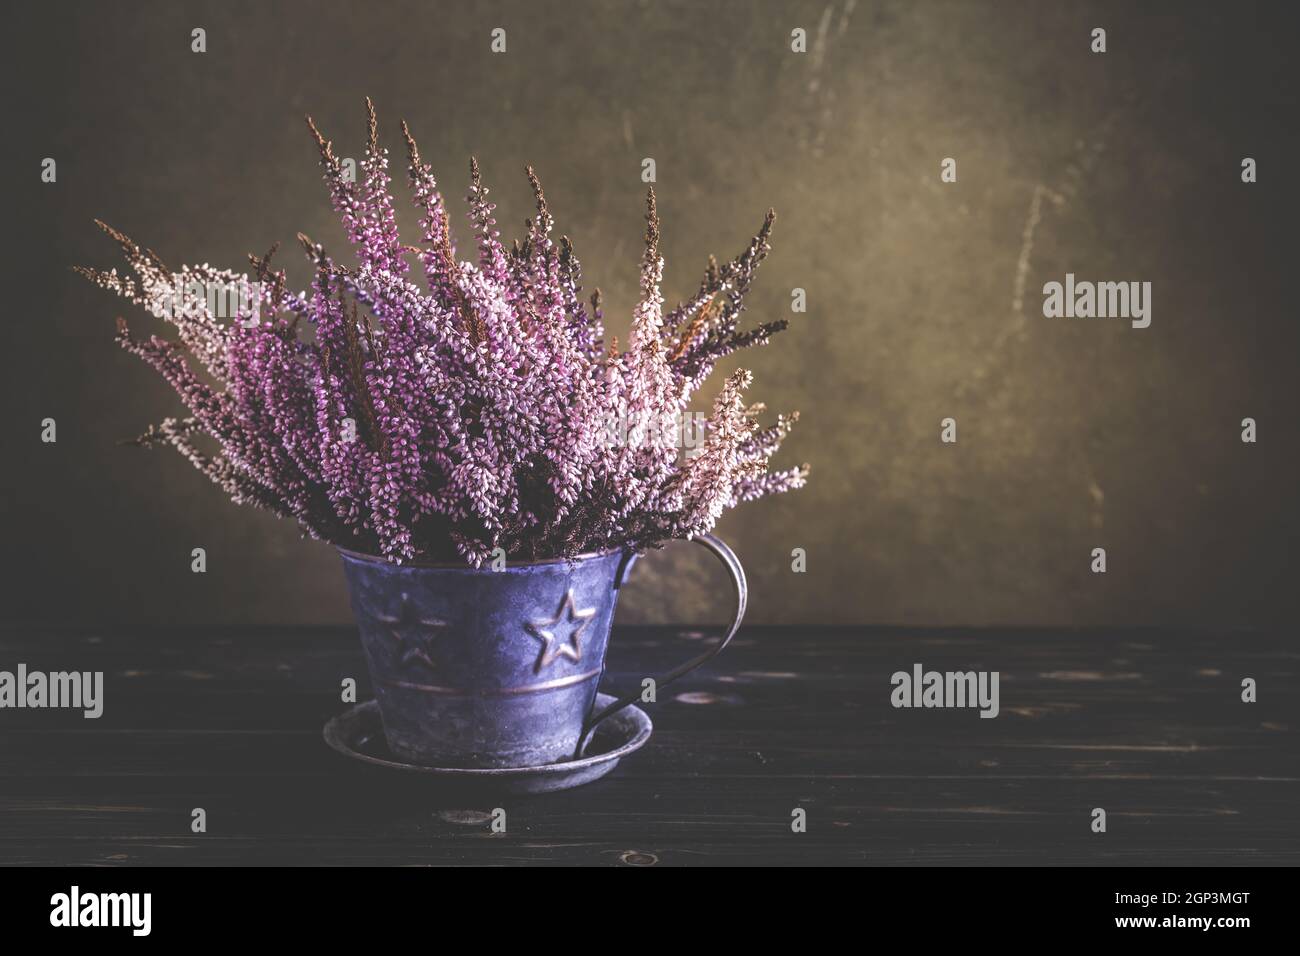 Heather plant (erica) in flower pot on wooden background in vintage style Stock Photo